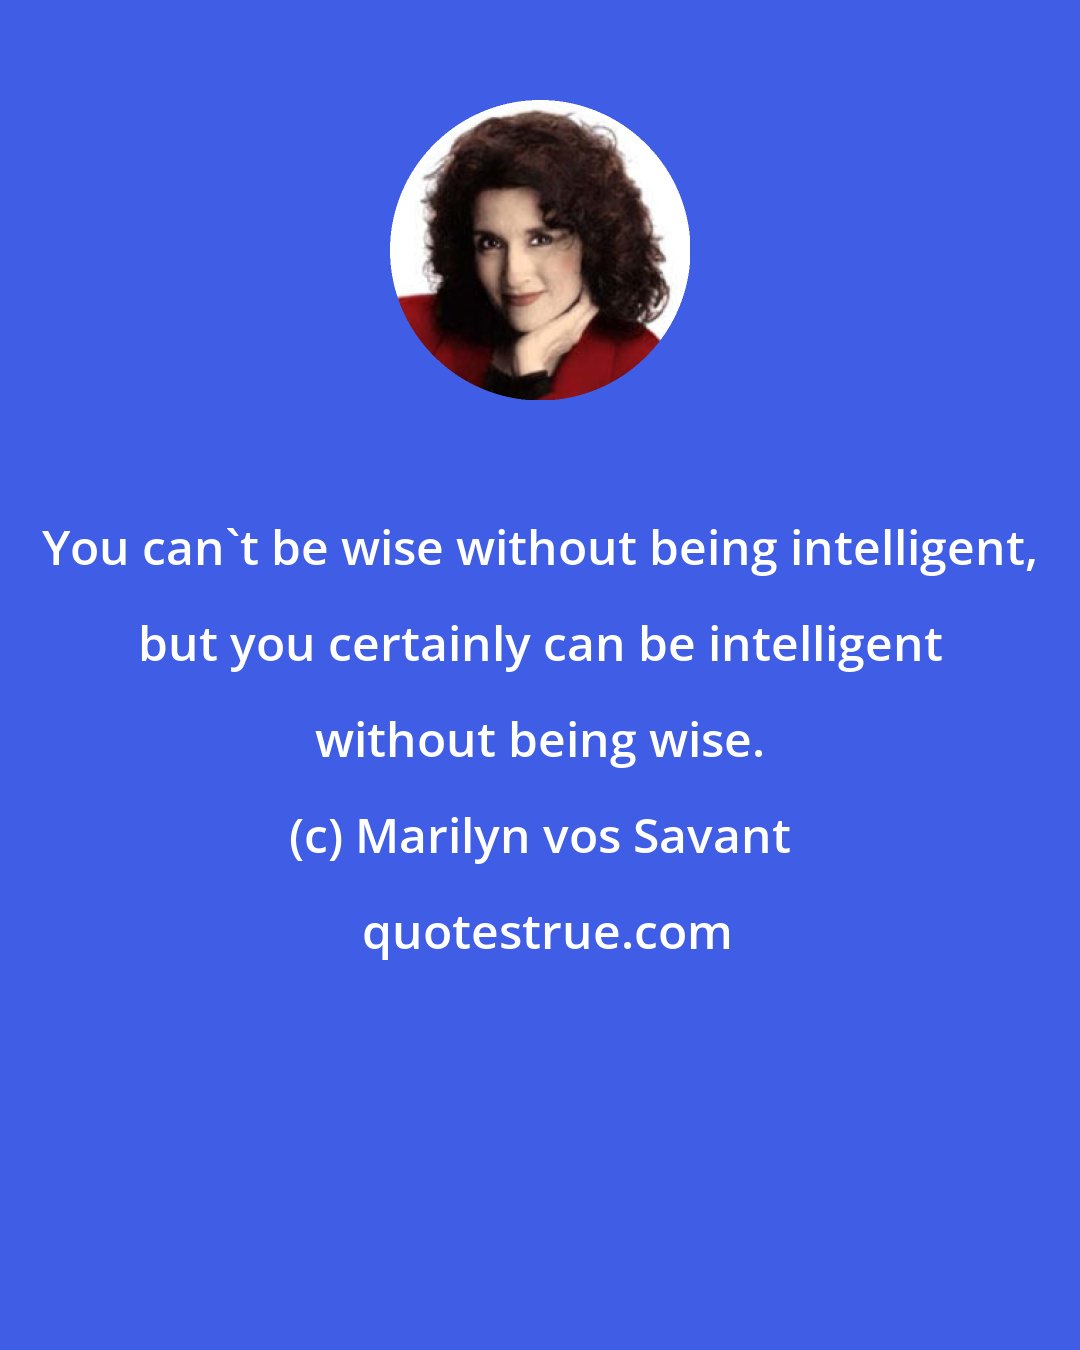 Marilyn vos Savant: You can't be wise without being intelligent, but you certainly can be intelligent without being wise.